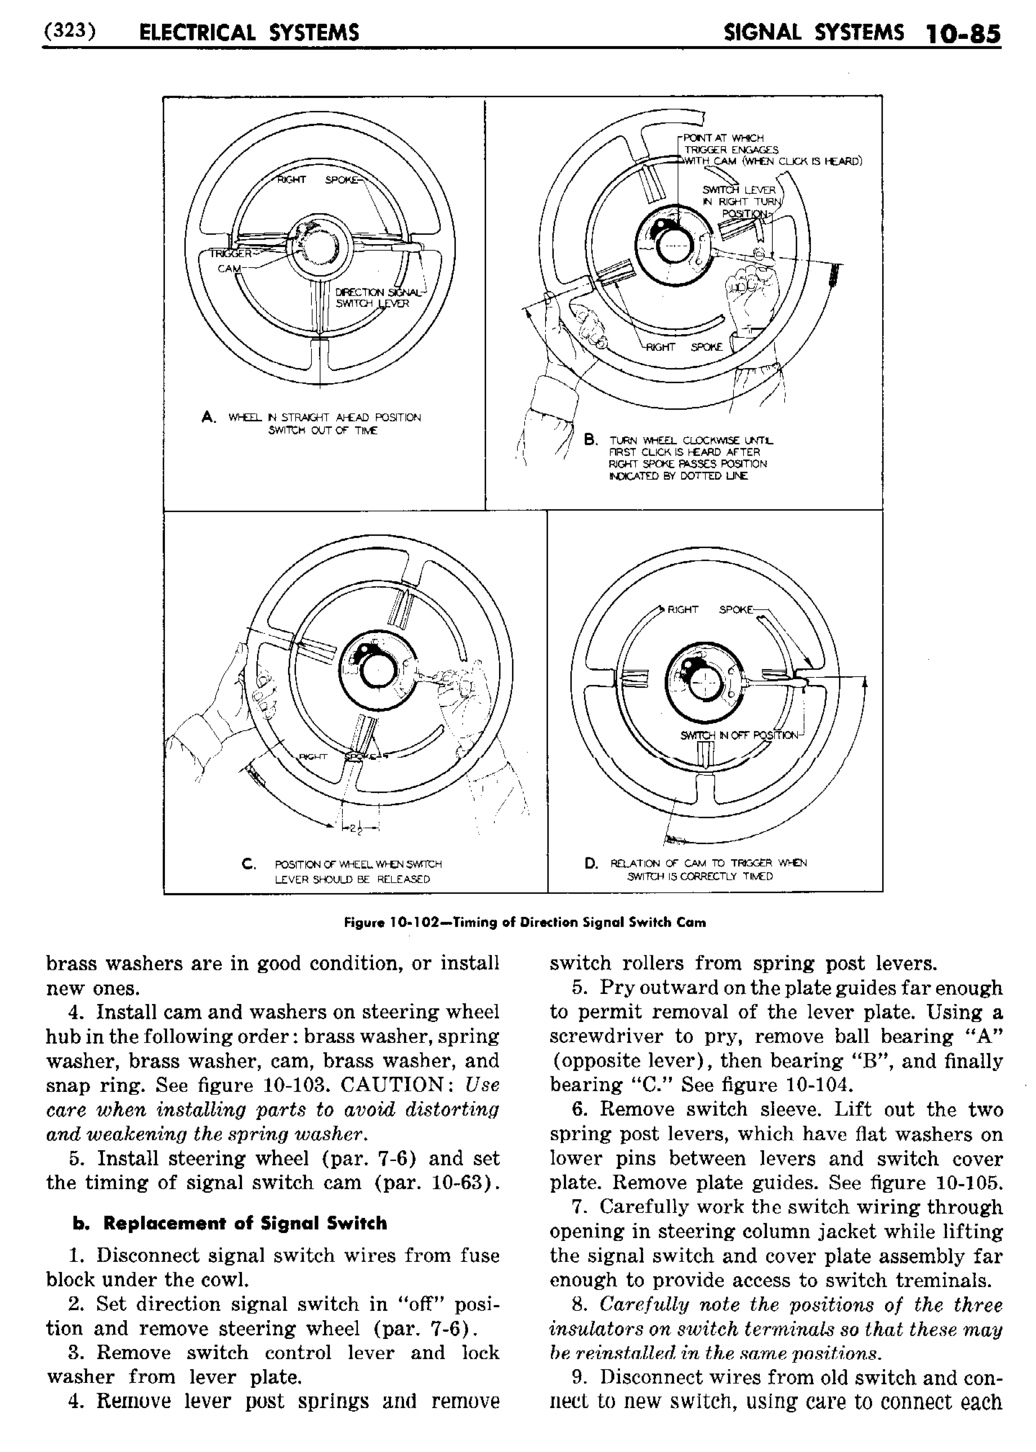 n_11 1950 Buick Shop Manual - Electrical Systems-085-085.jpg